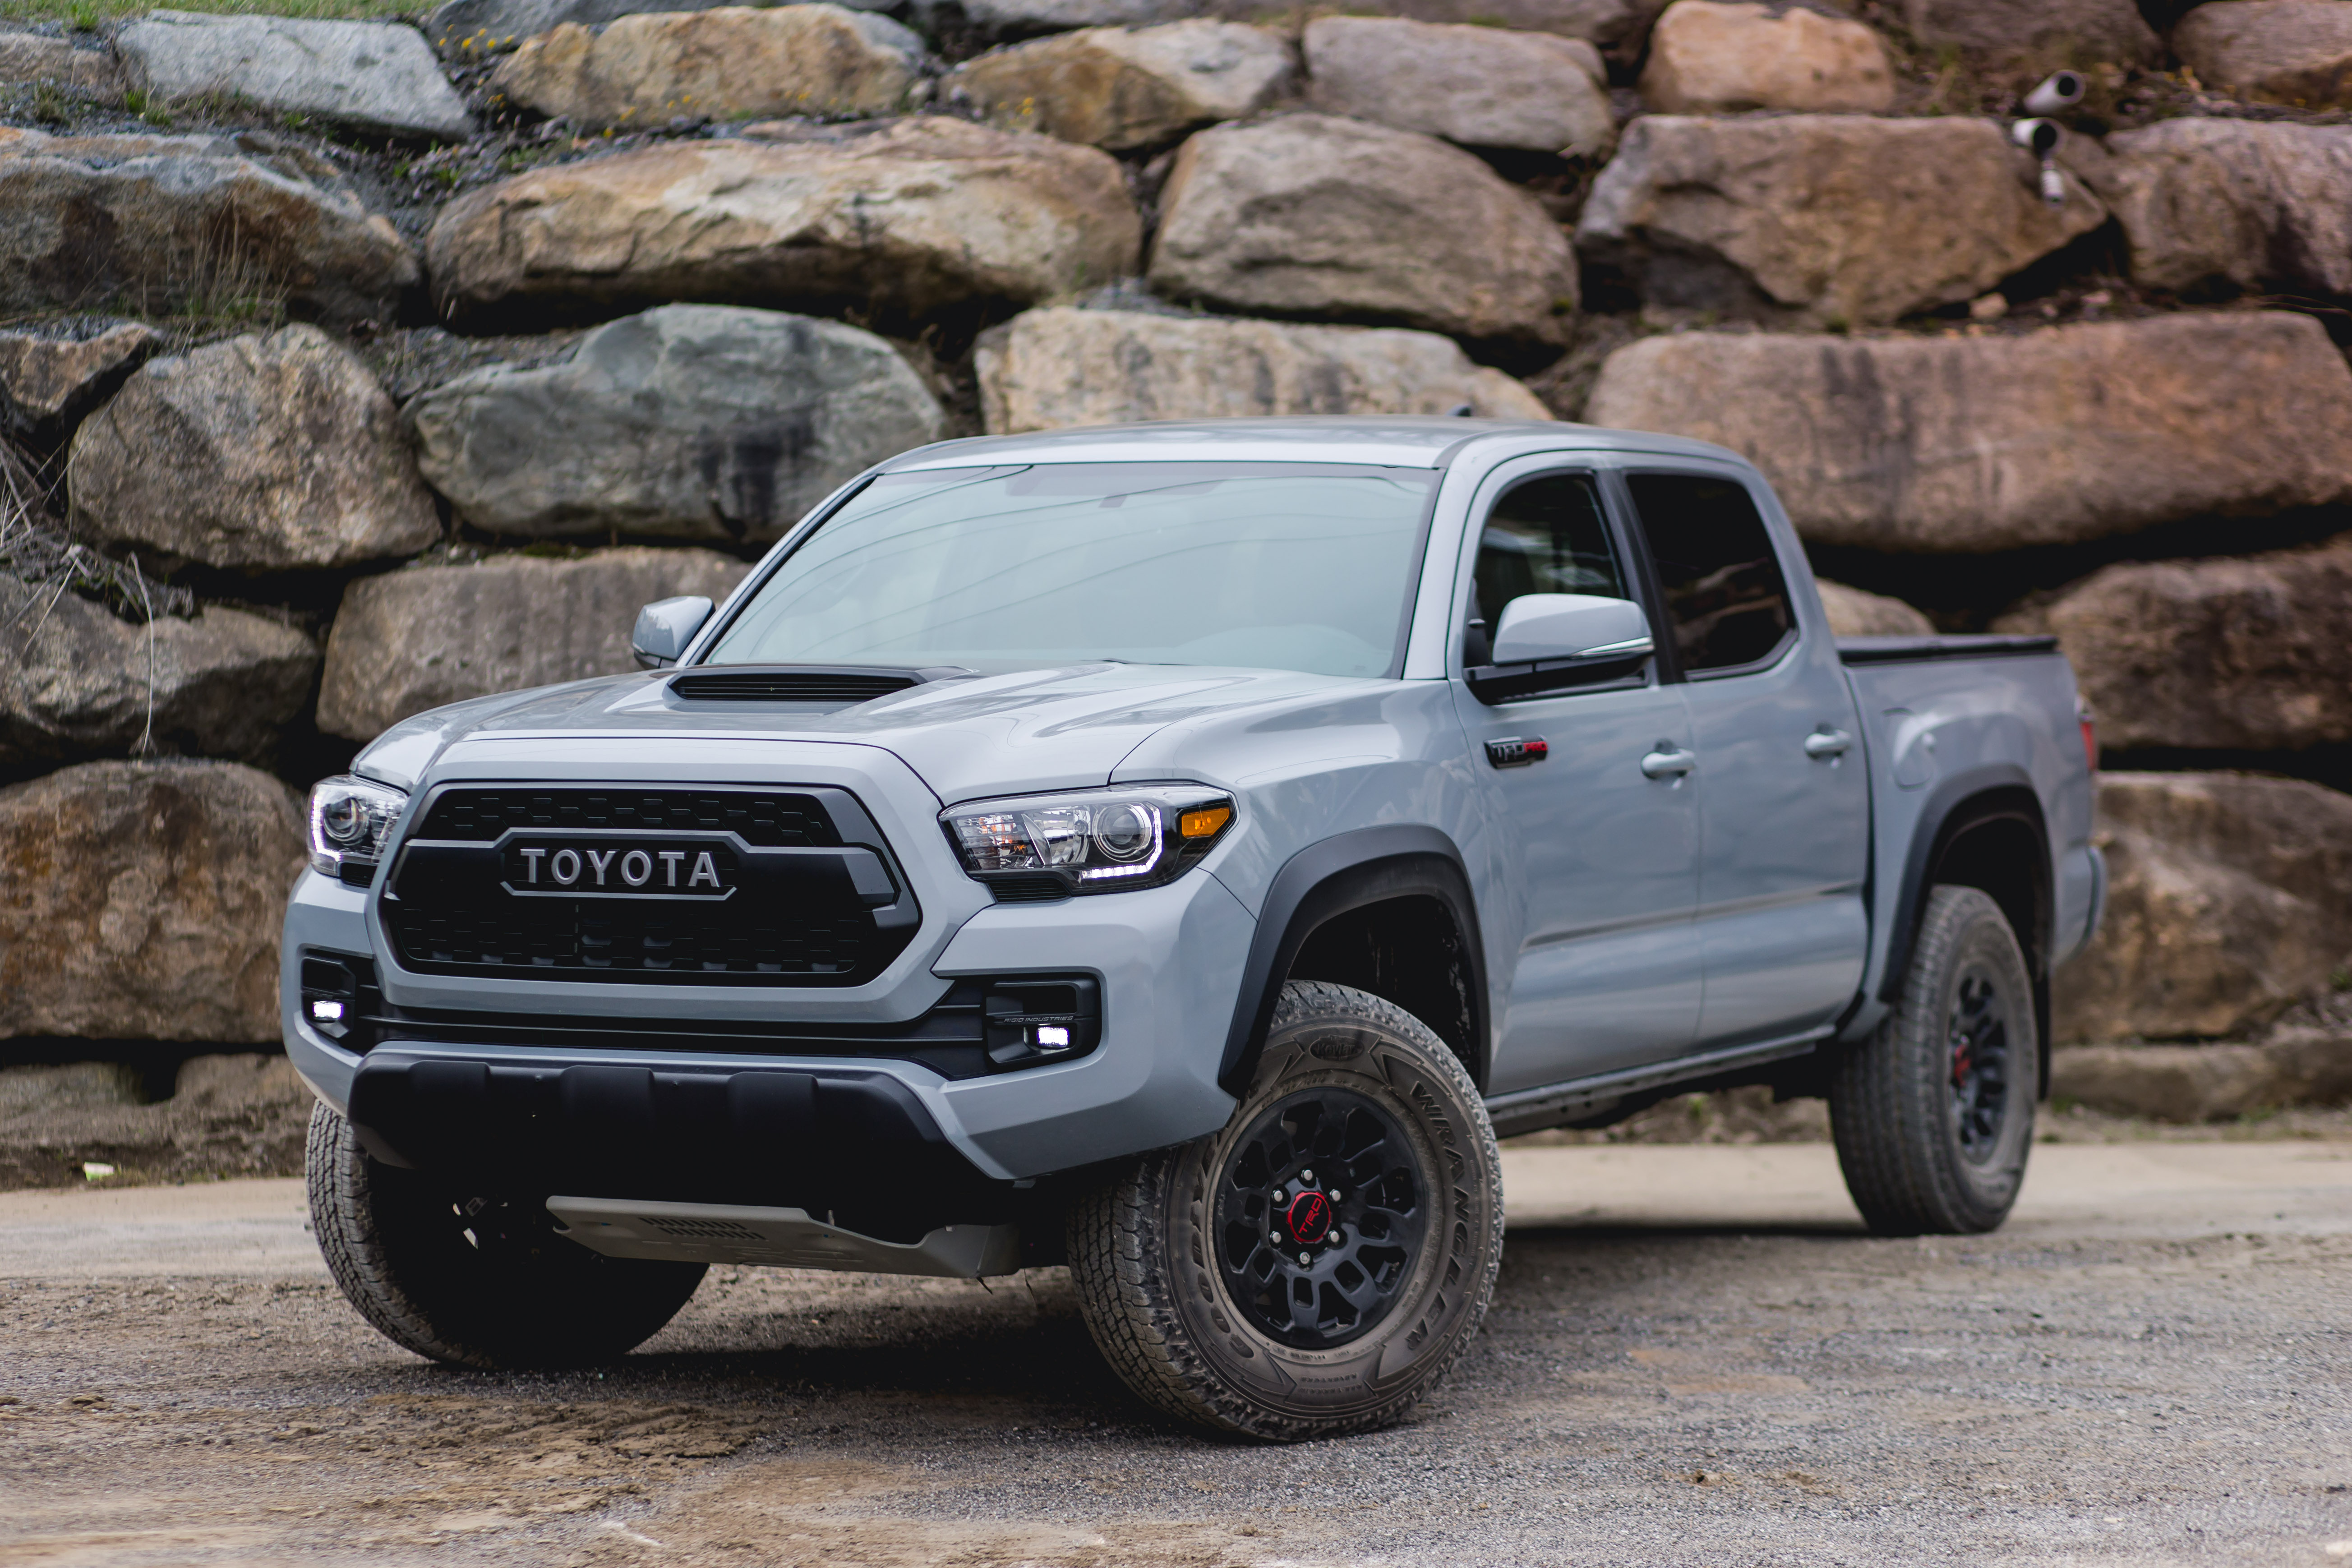 The 2017 Toyota Tacoma TRD Pro Is The Bro Truck We All Need